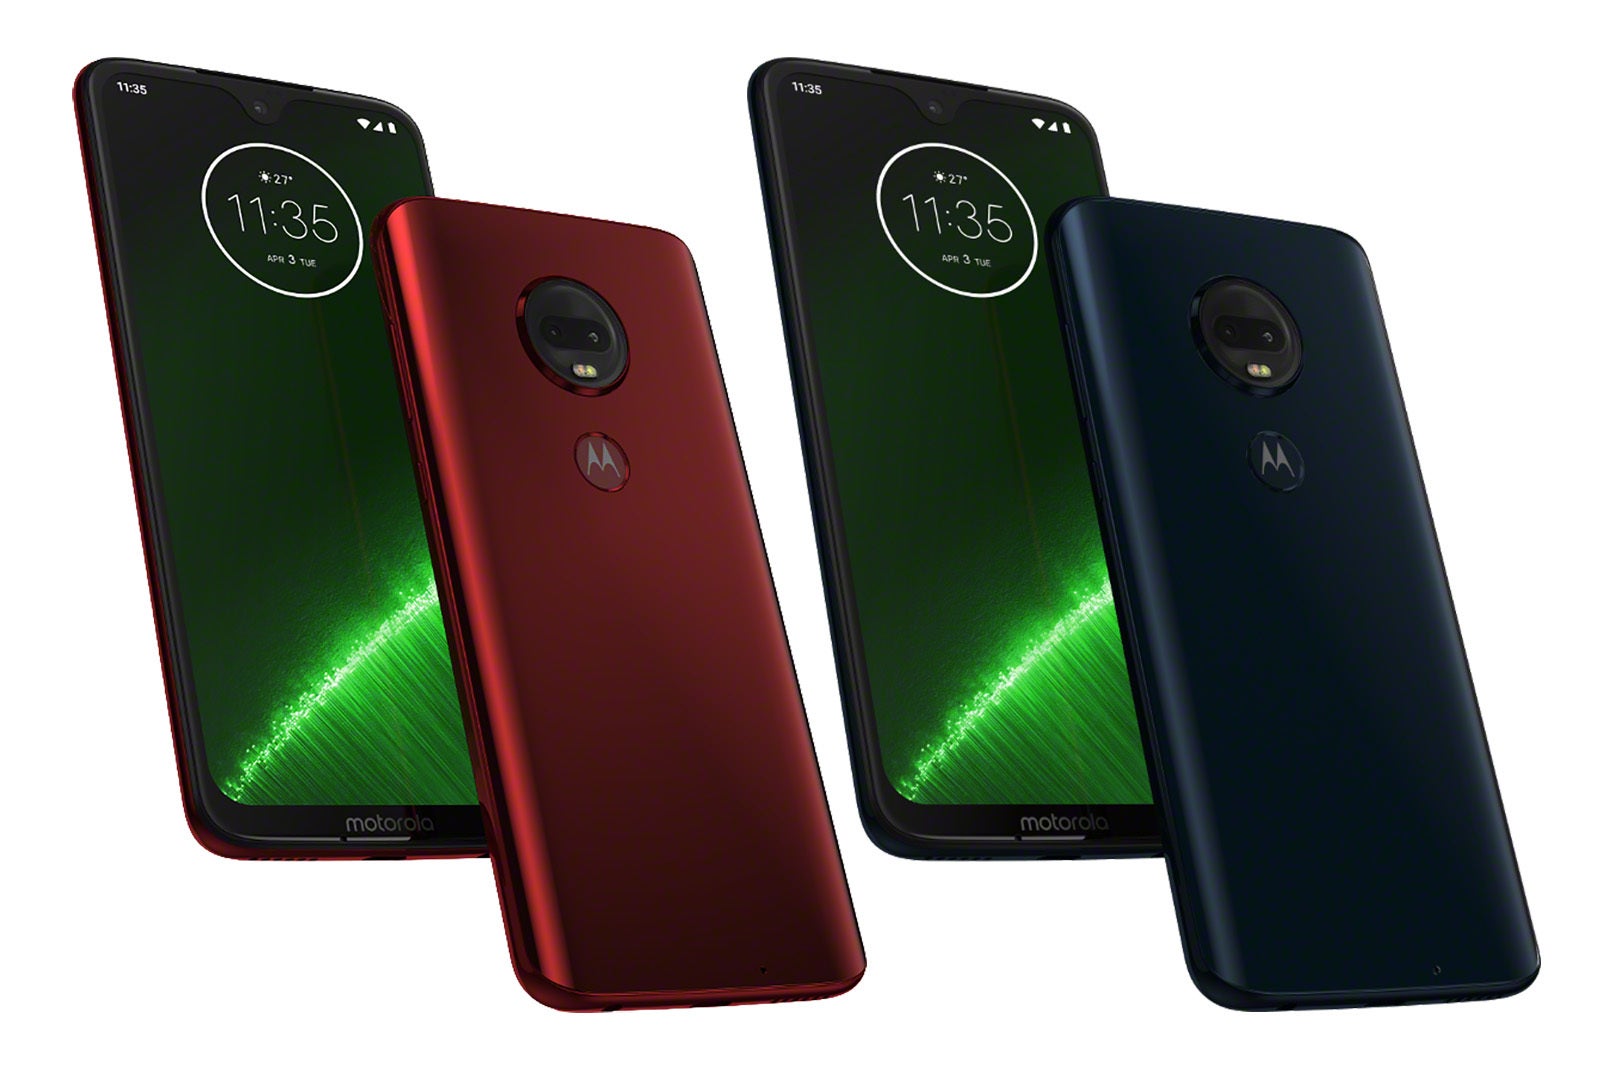 The G7 Plus in its two colors, viva red and deep indigo - Motorola officially unveils its 2019 Moto G series: the Moto G7, G7 Play, G7 Power and G7 Plus